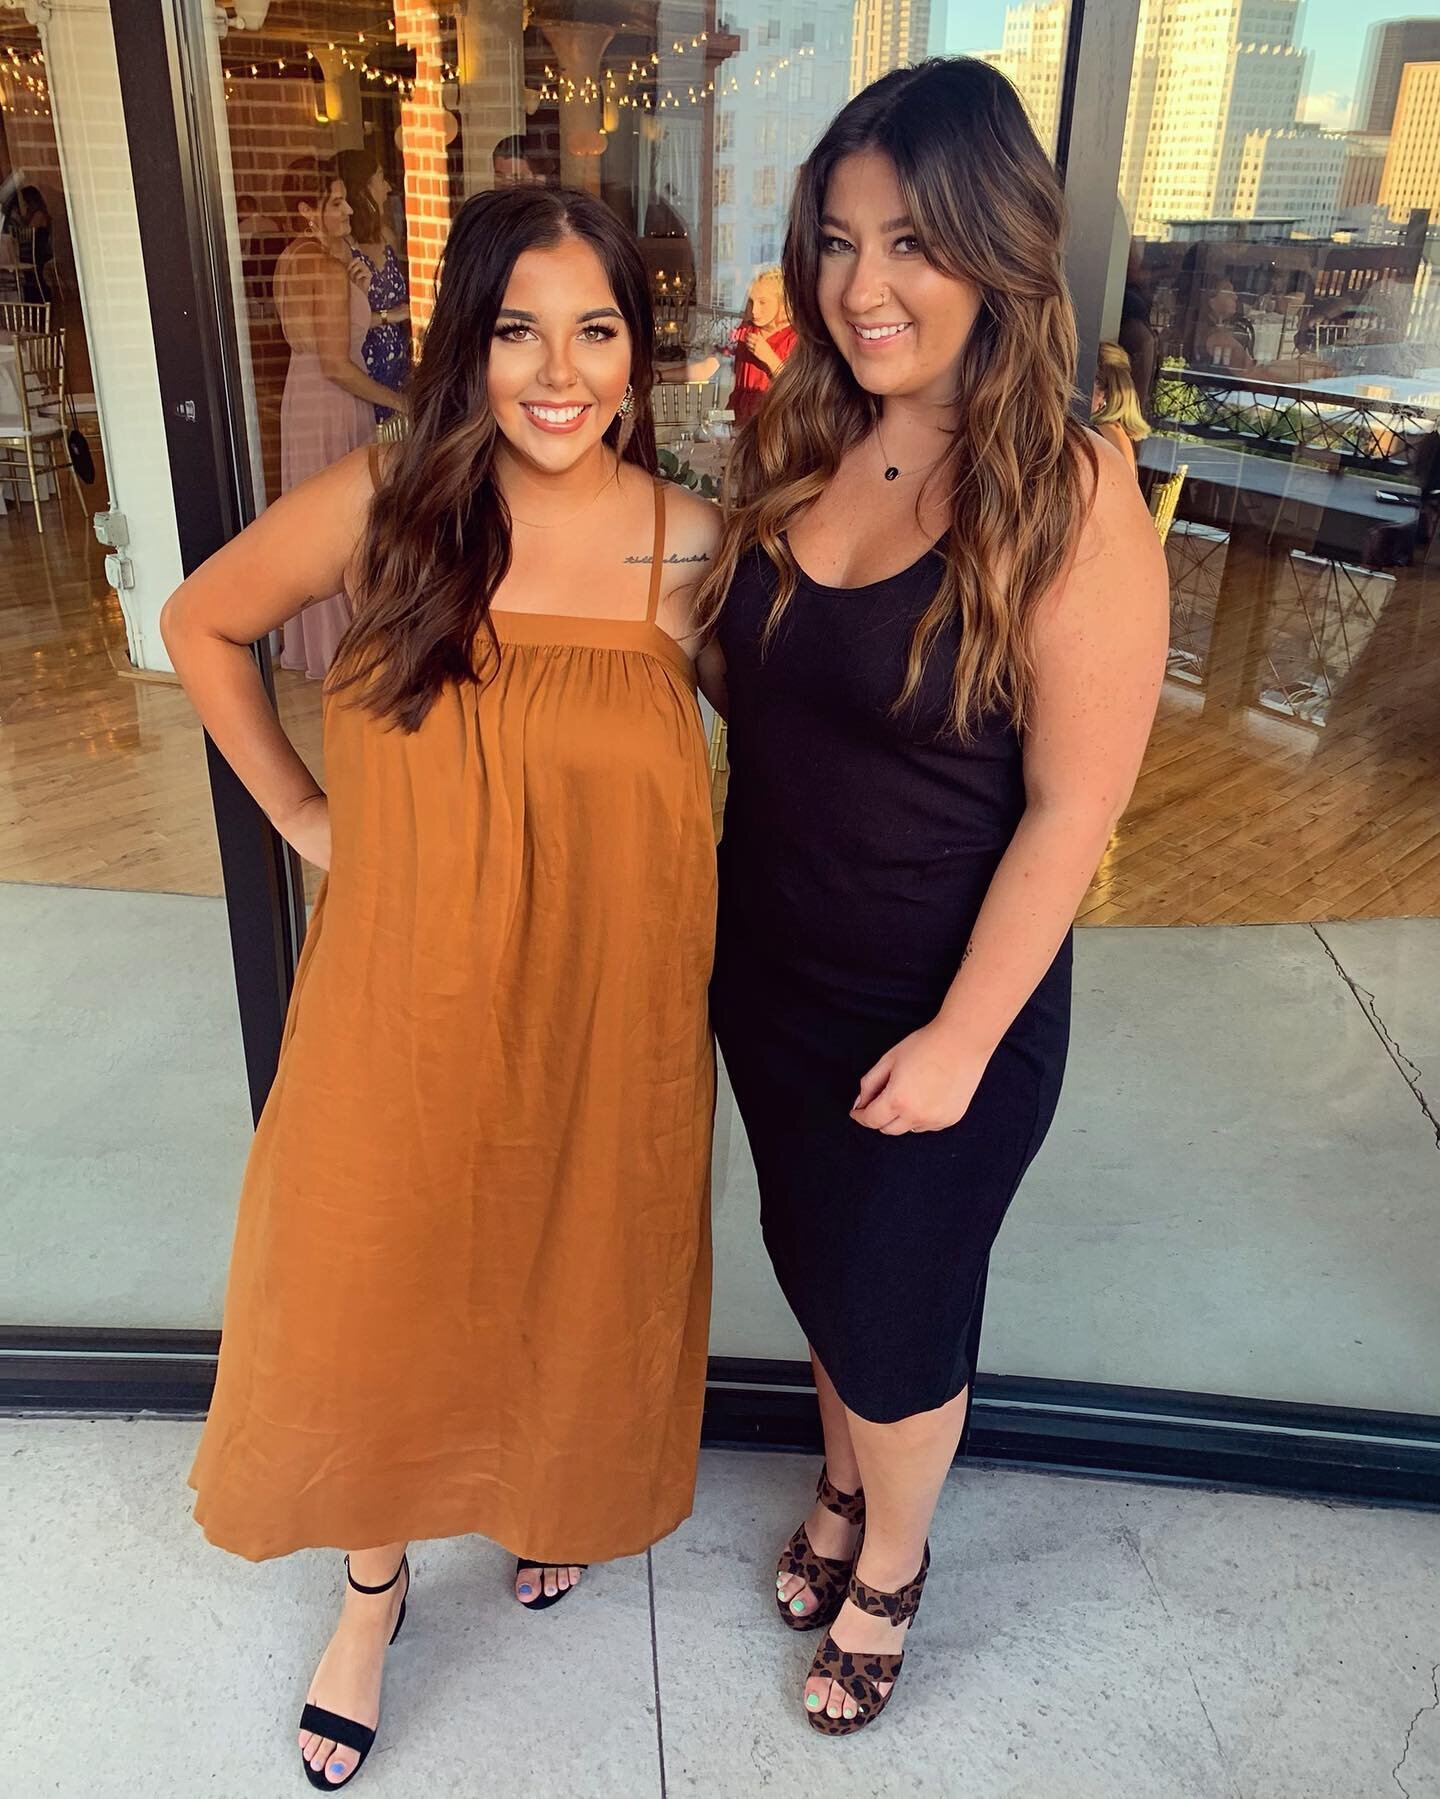 🦋MEET LILY🦋 she is my newest associate - most of you may have already met her, but for those of you who have not, she will be working alongside me behind the chair! During the associate program at @theboulevardhaircompany she will learn all of my t